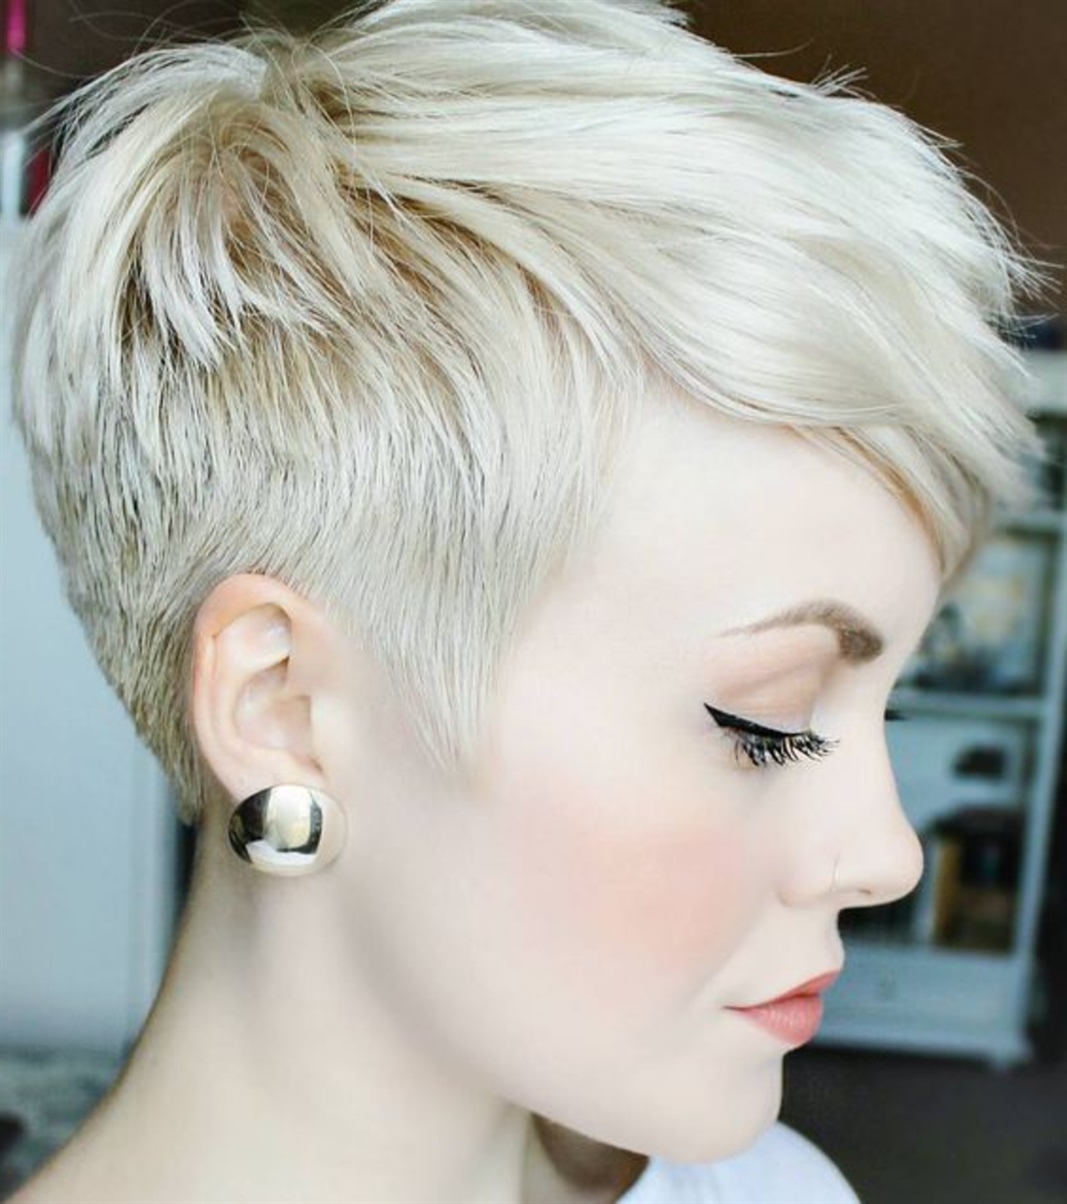 Short Pixie Hairstyles 2021 for Blonde